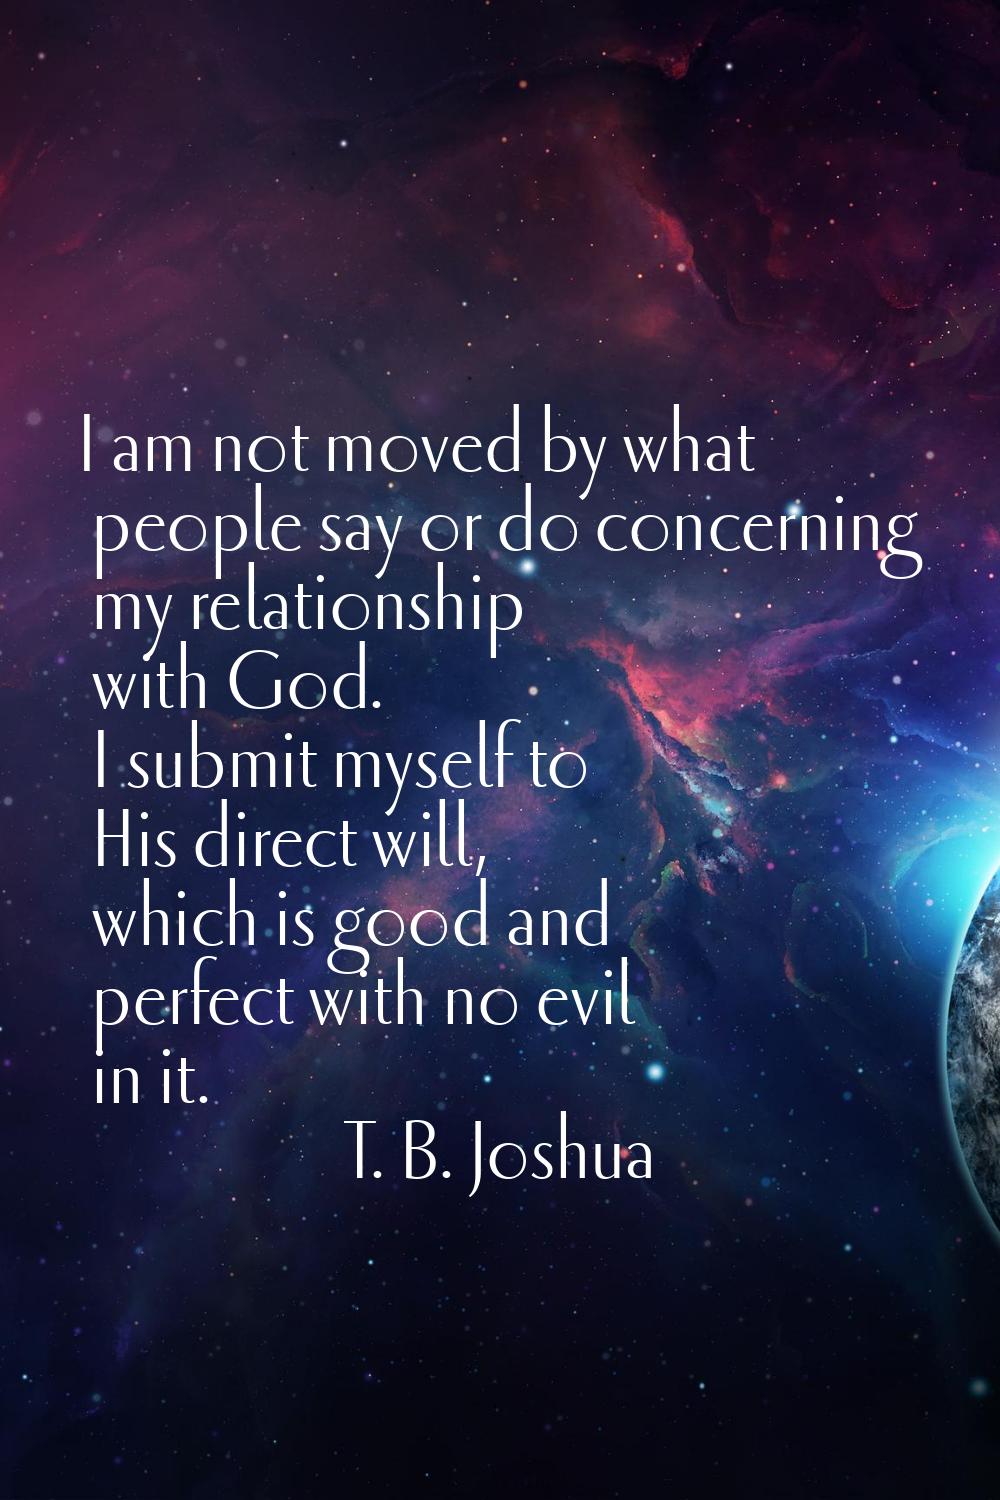 I am not moved by what people say or do concerning my relationship with God. I submit myself to His